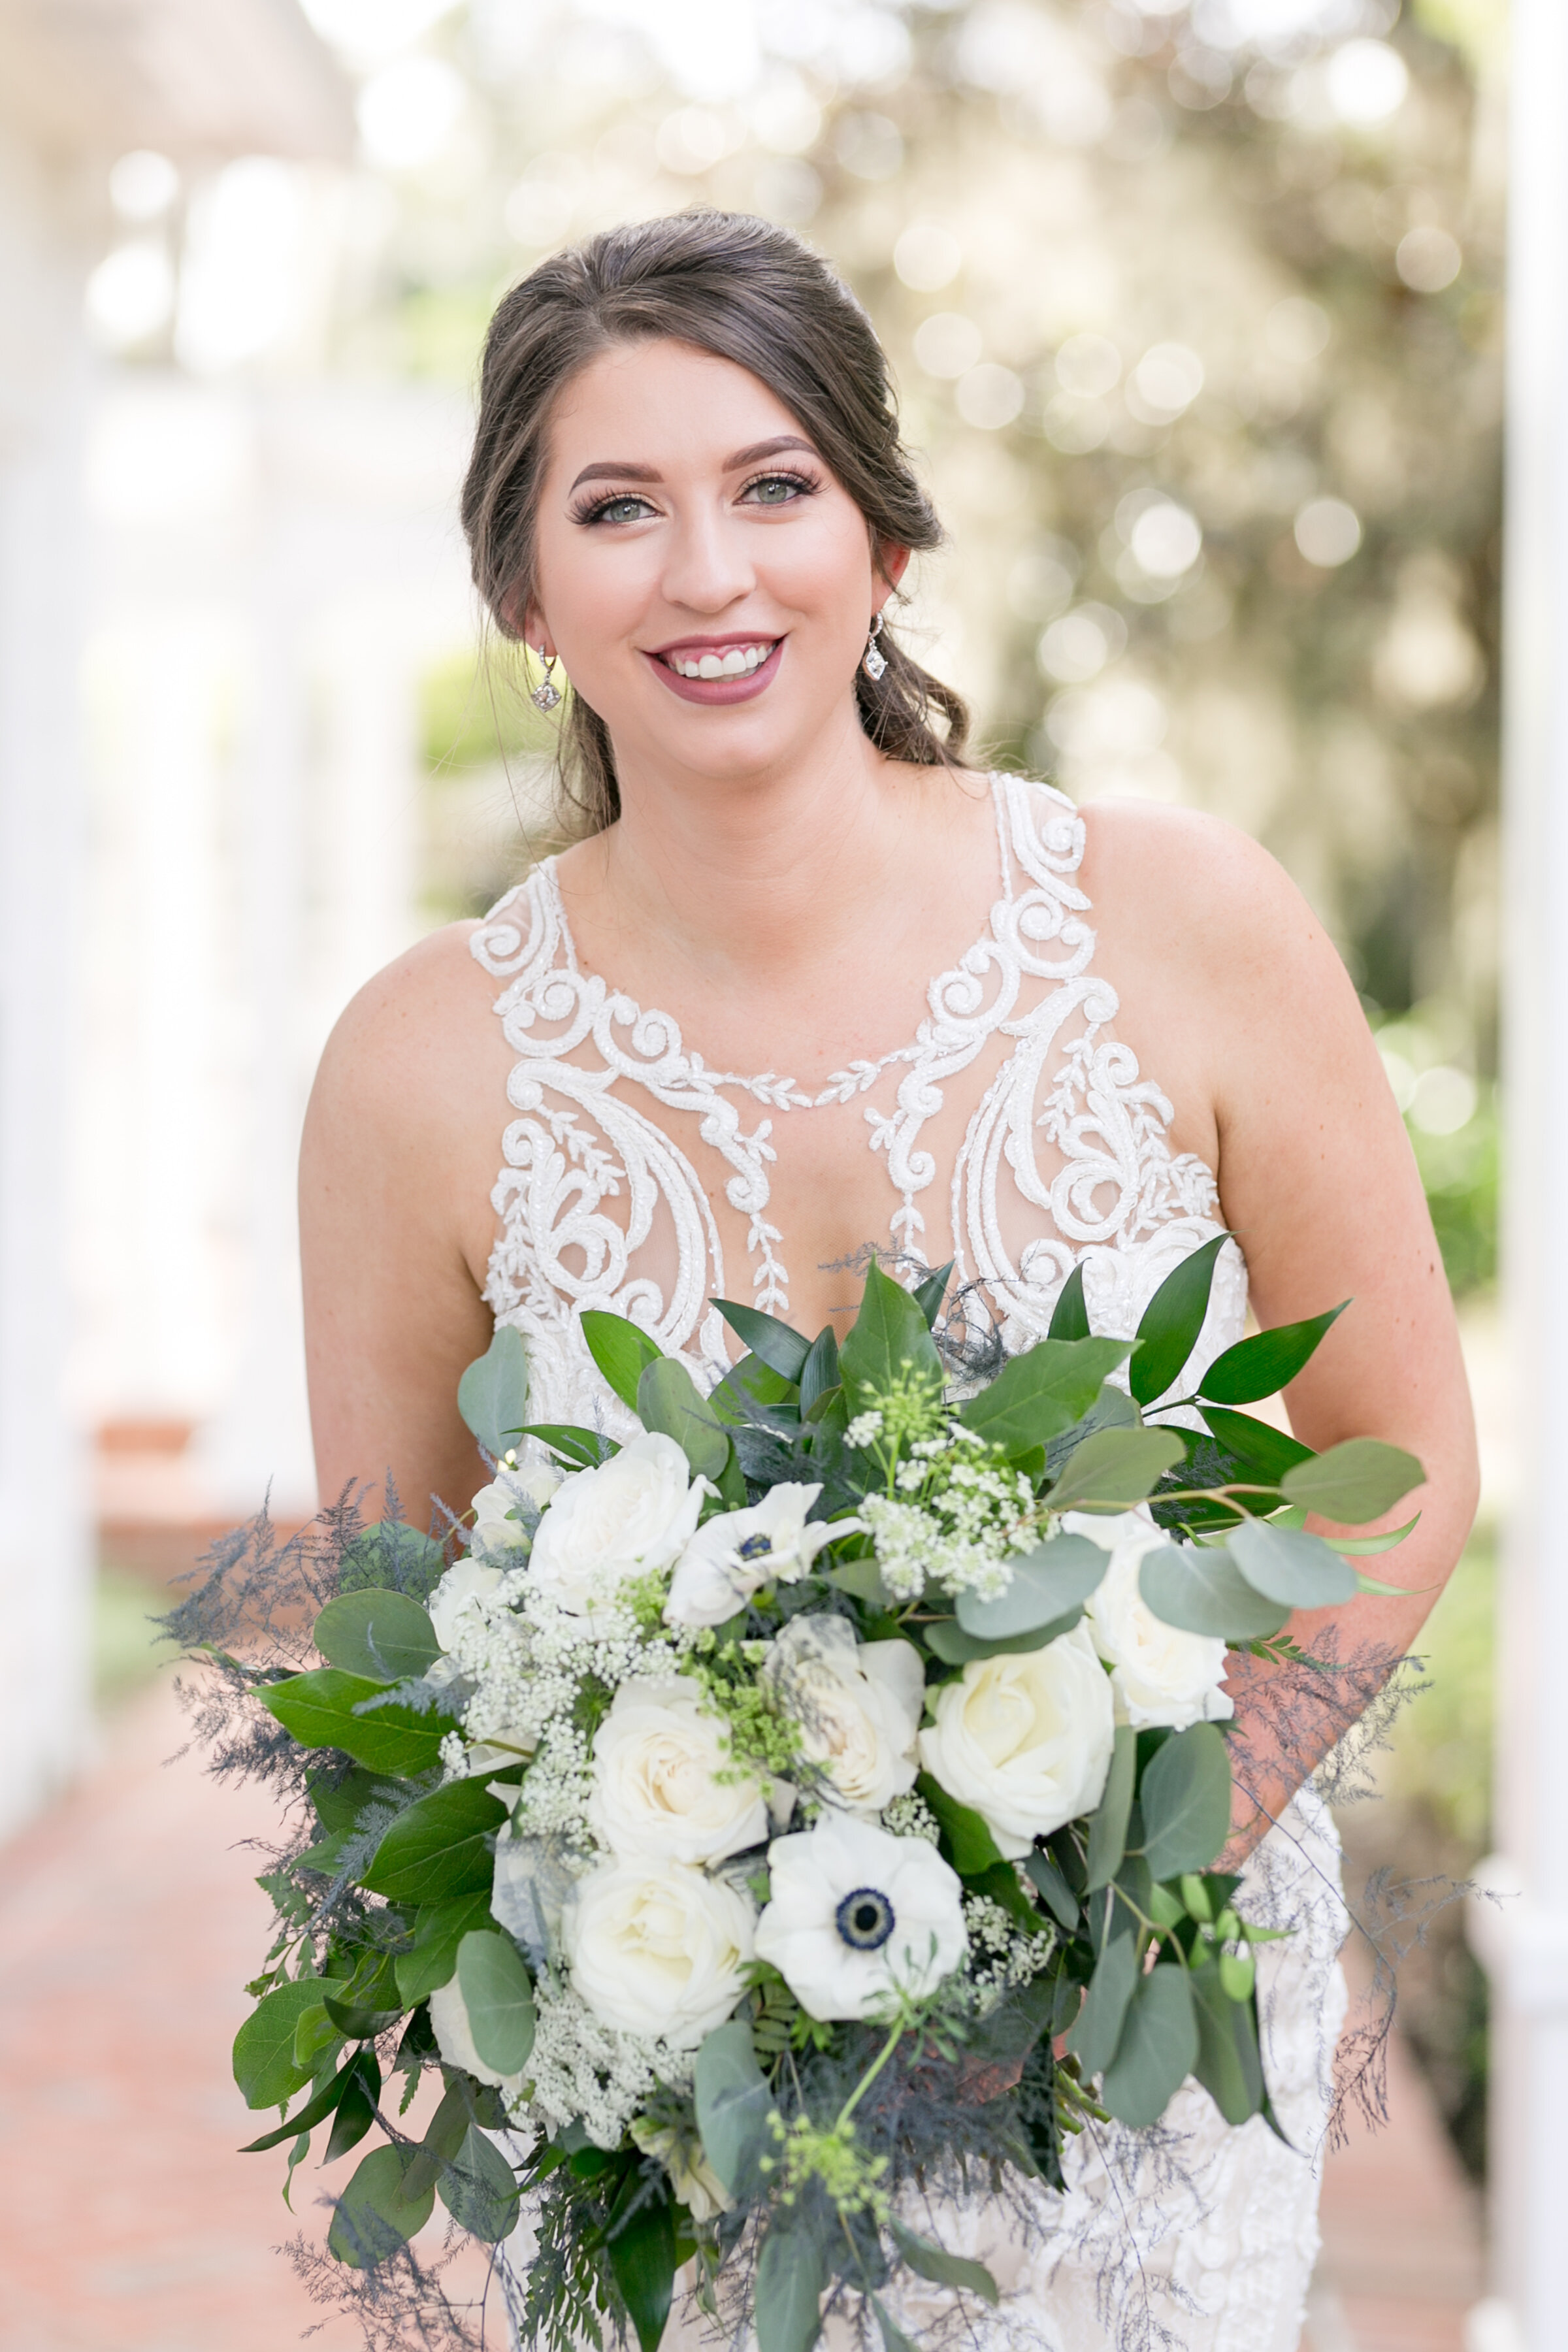 Bluegrass Chic - Black and White Wedding Bouquets with Anemones